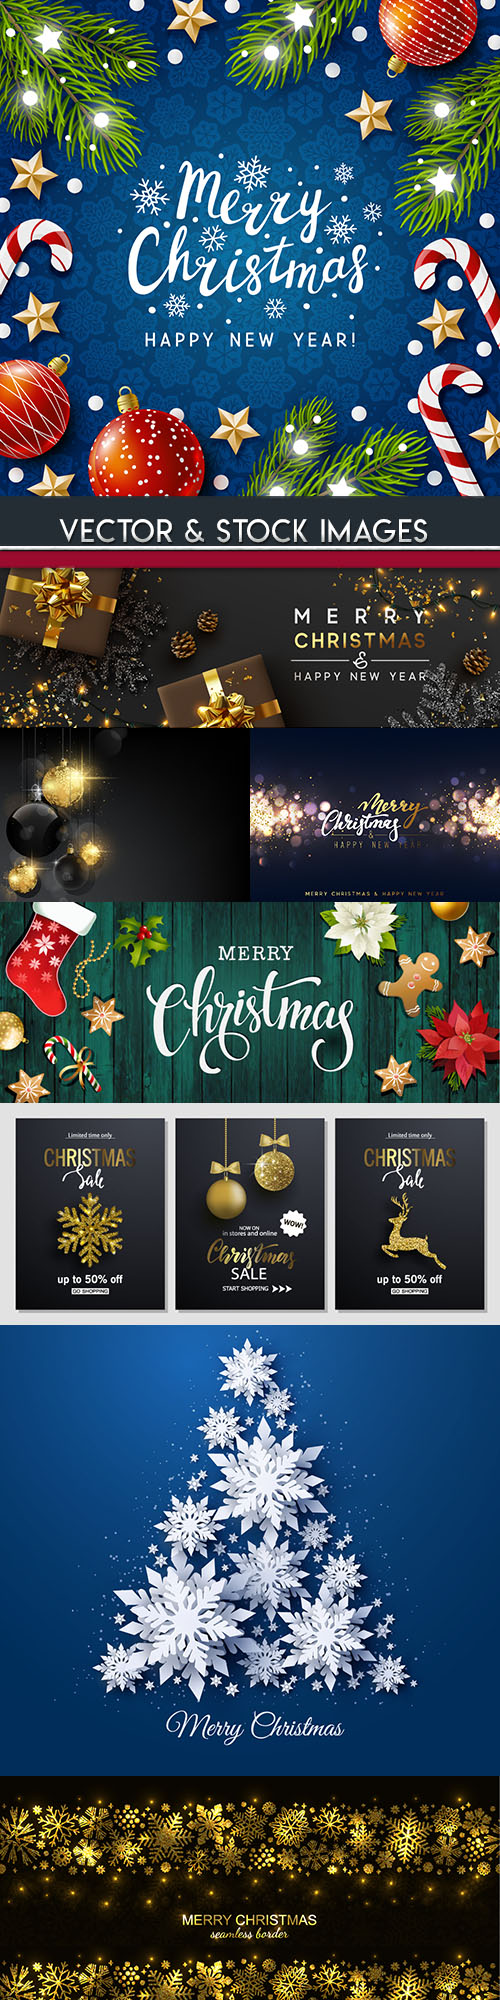 New Year and Christmas decorative illustration 3